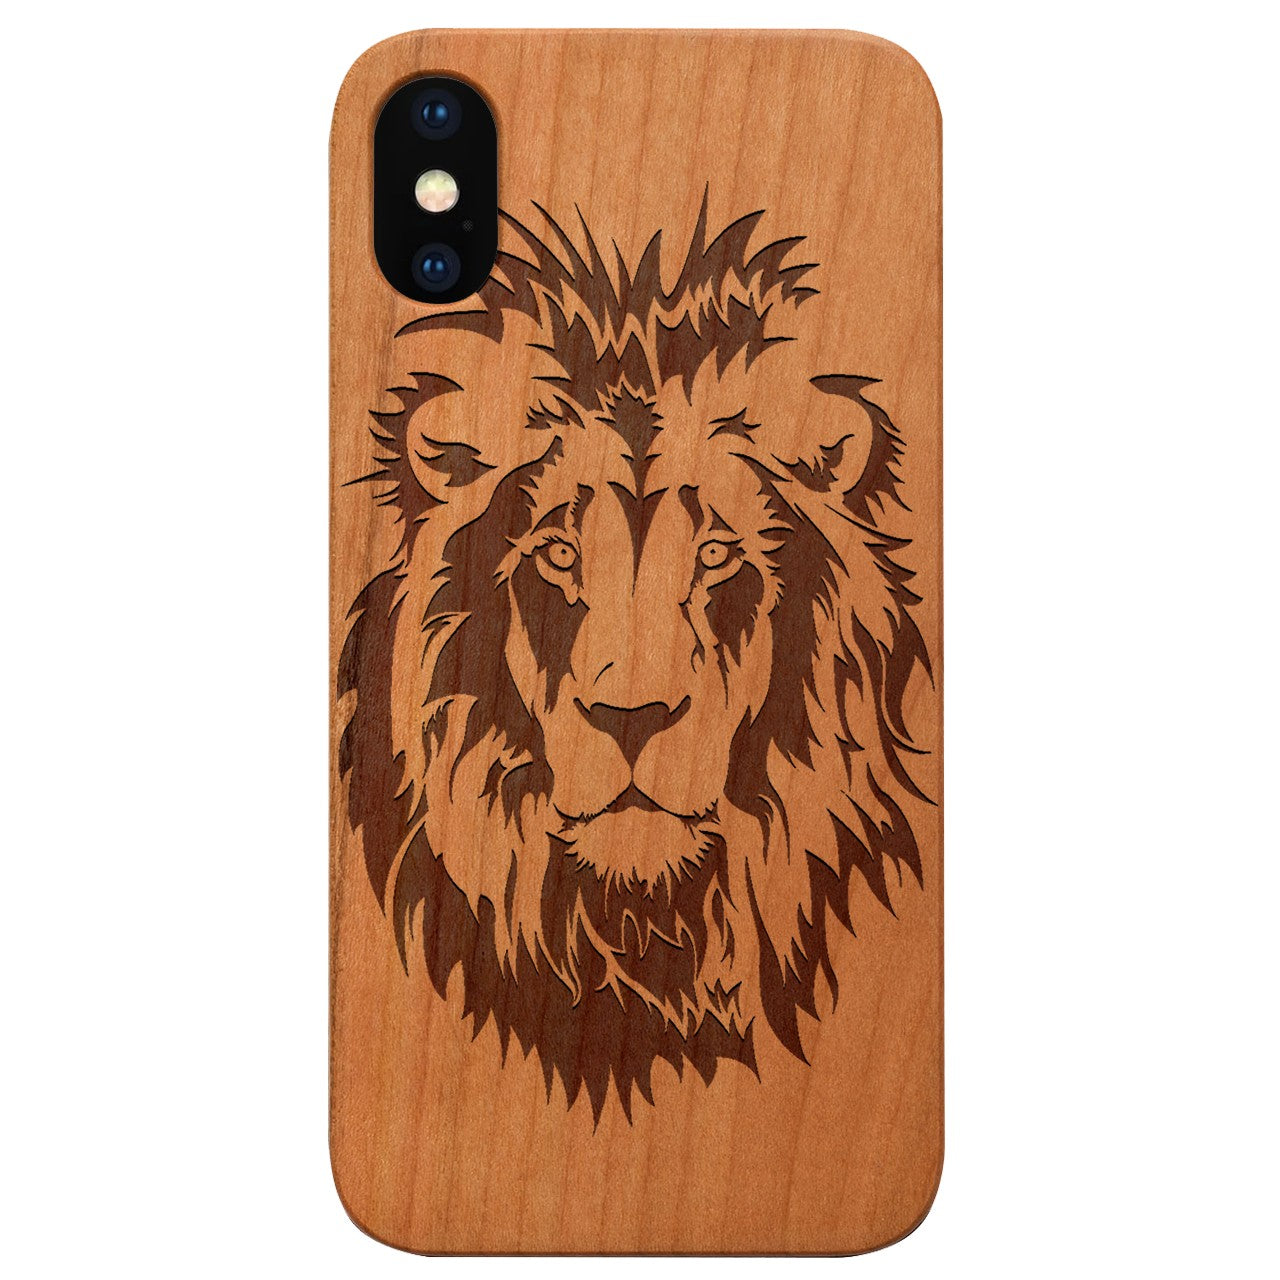  Lion Face 5 - Engraved - Wooden Phone Case - IPhone 13 Models